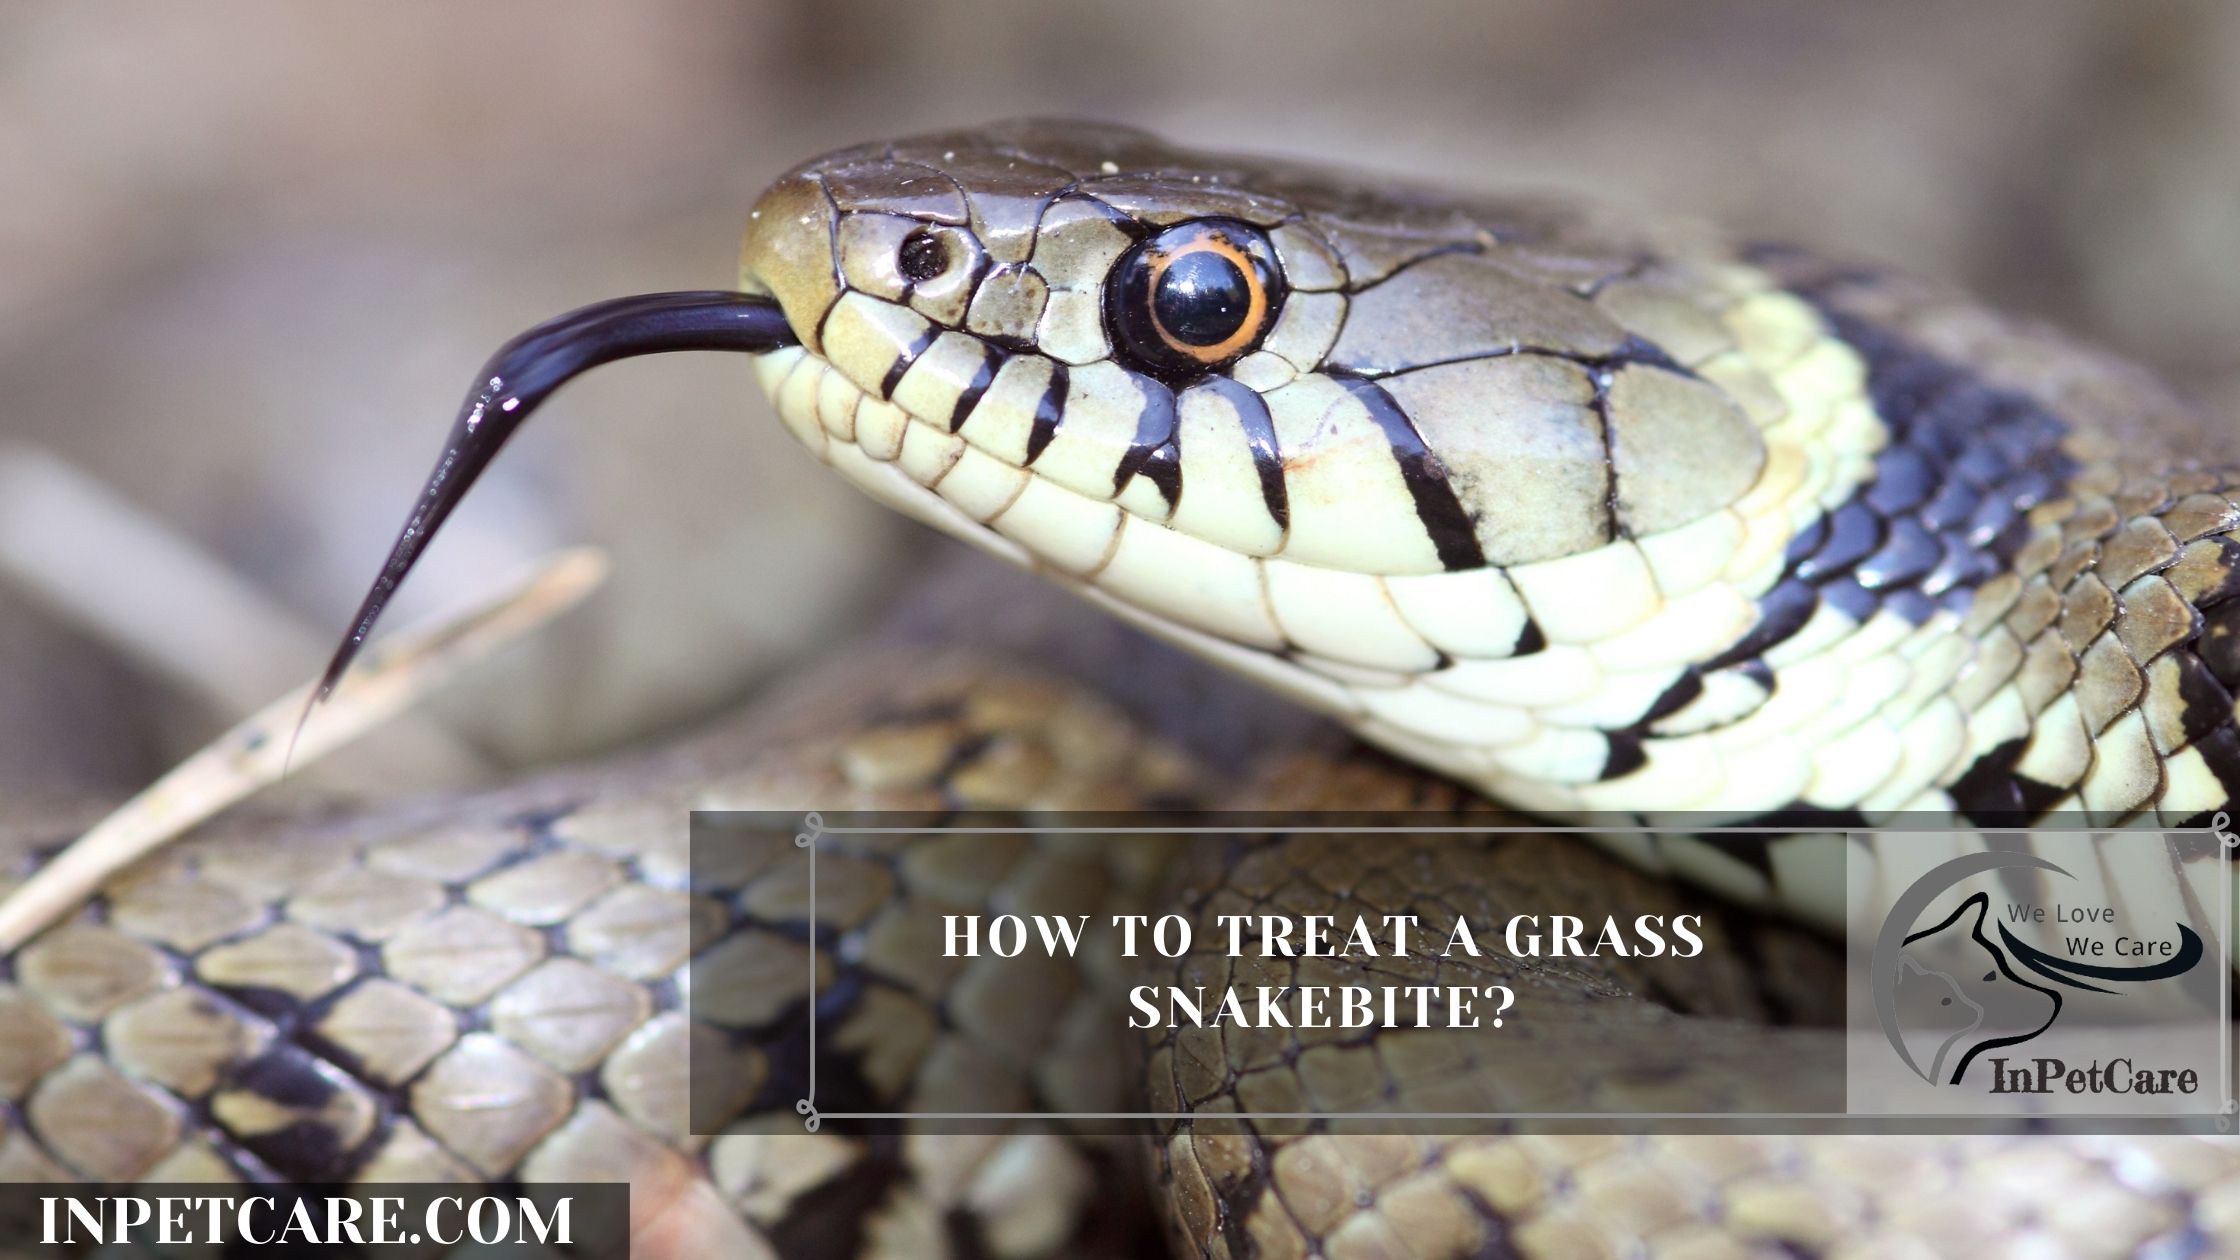 How To Treat A Grass Snakebite?